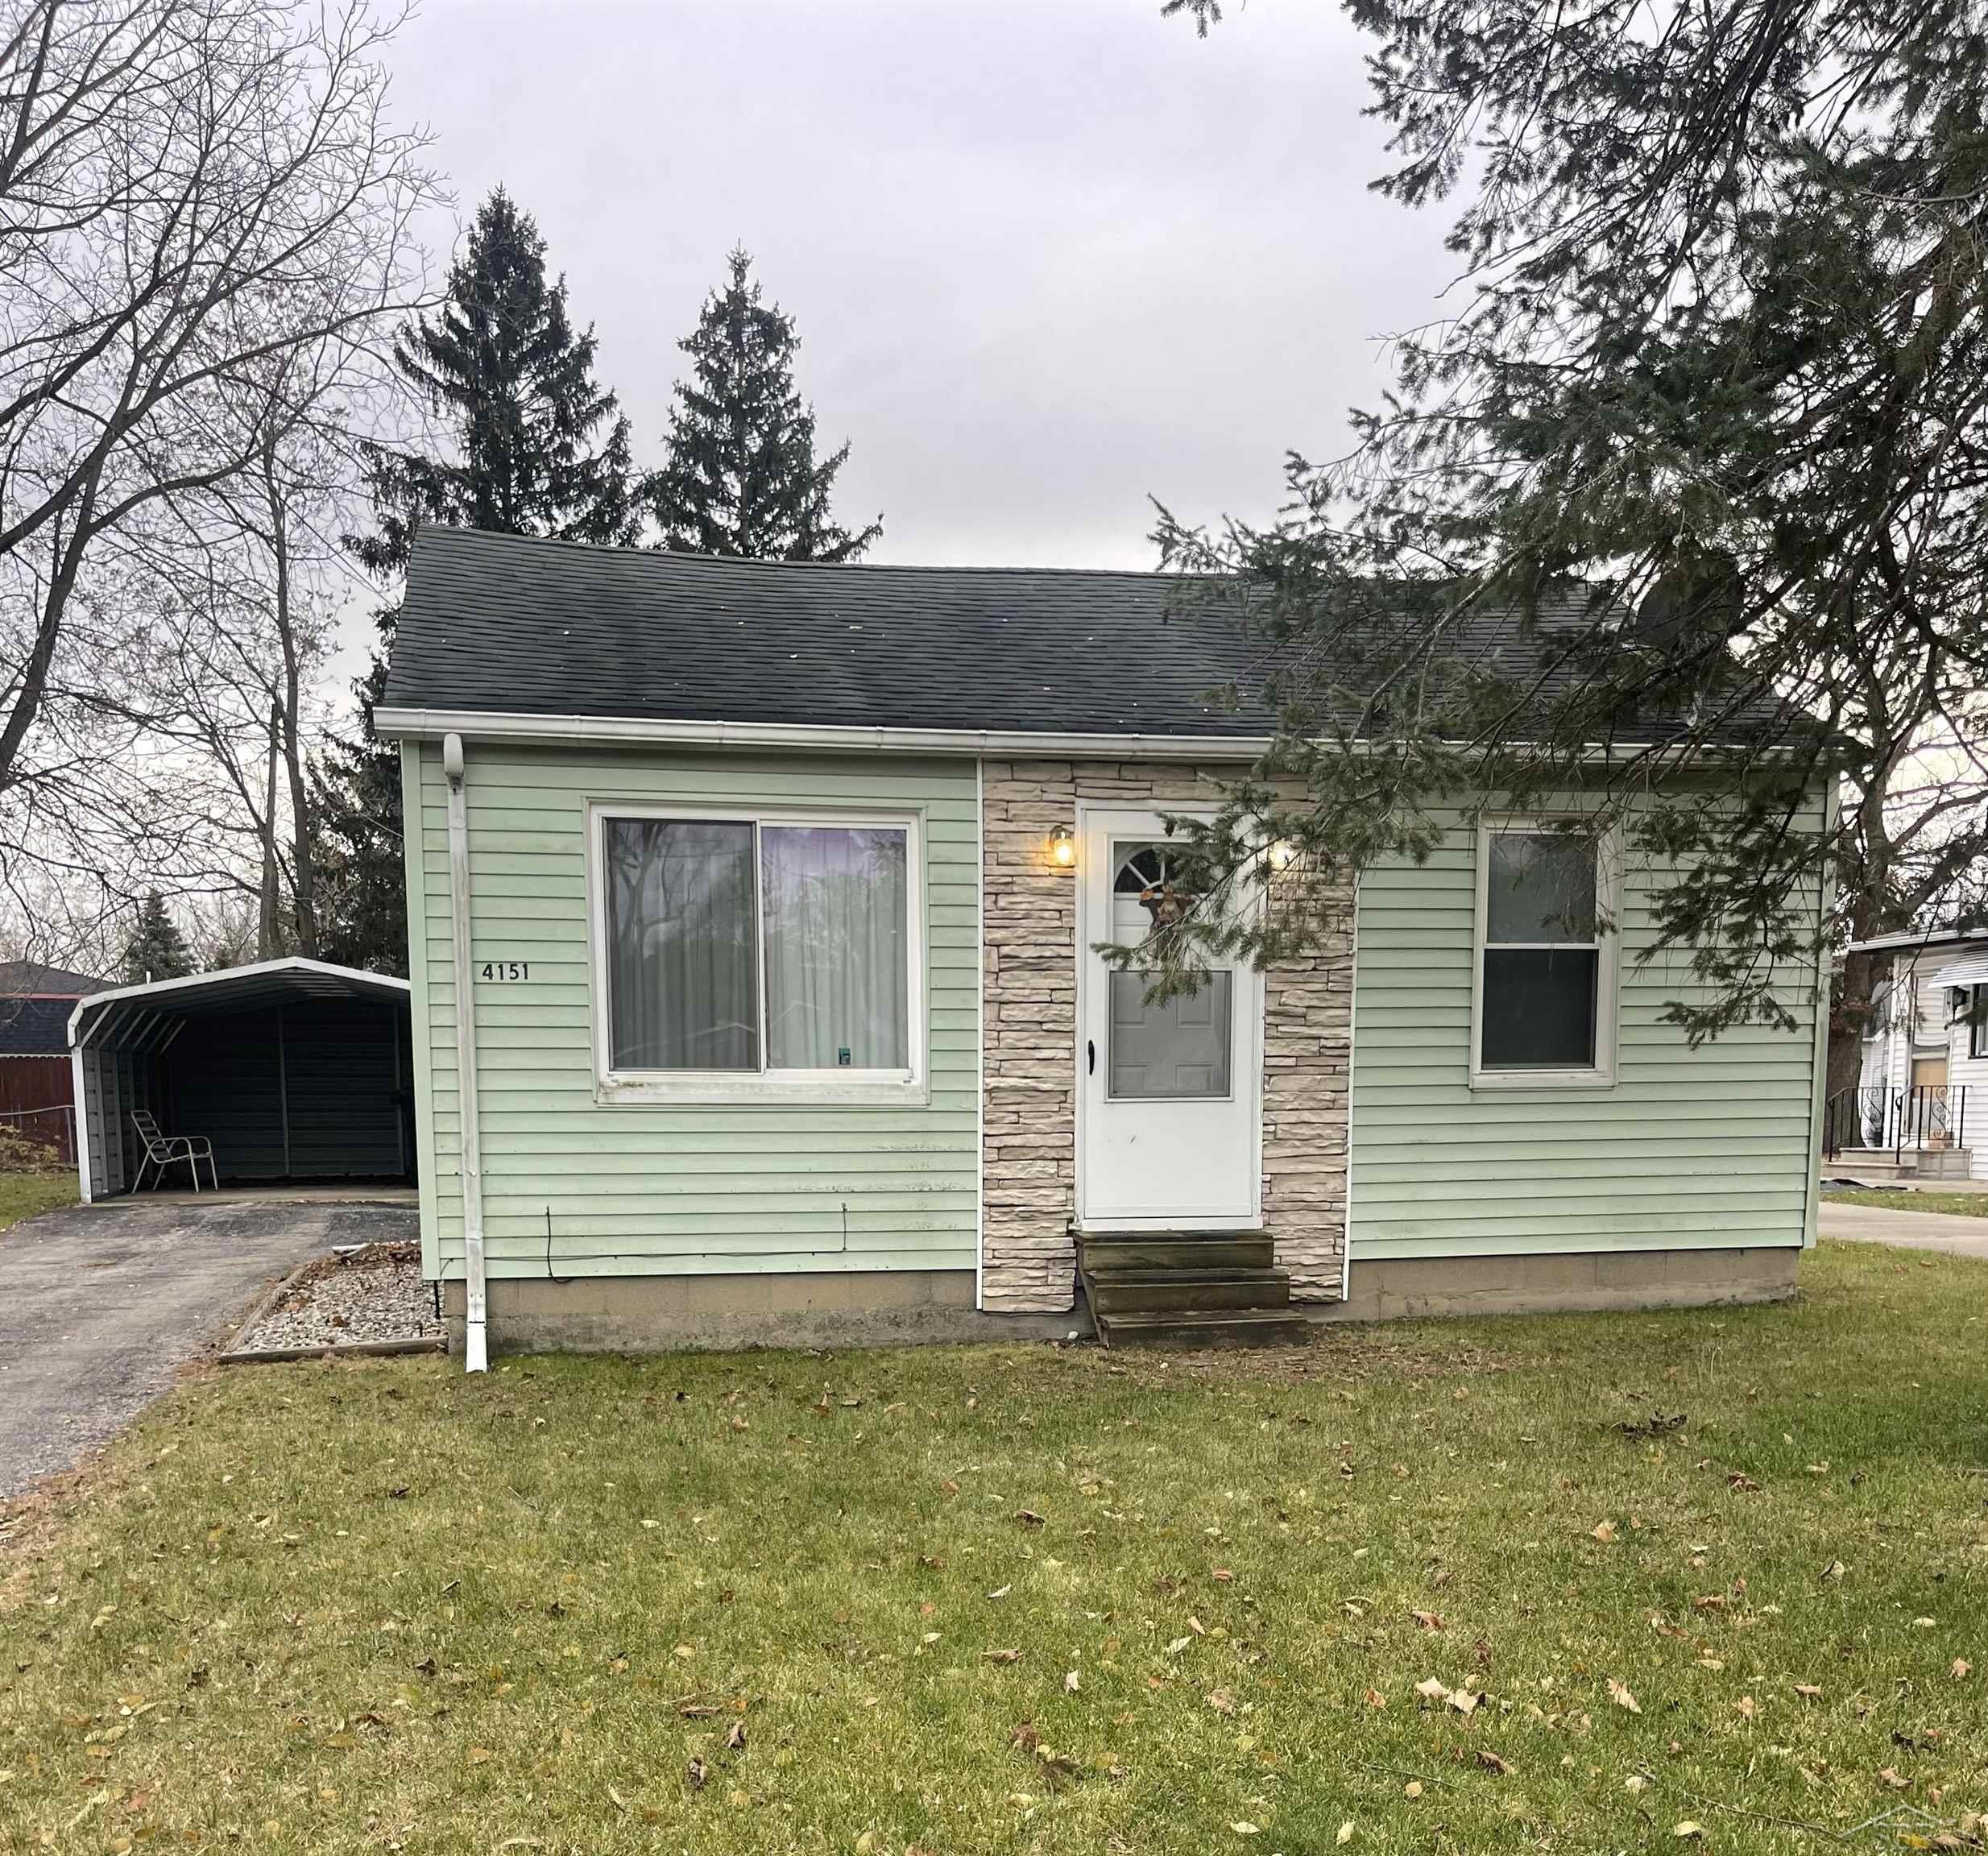 One owner 3 bedroom home with partial basement and a nice size back yard. Newer furnace and hot water heater, appliances stay.  Saginaw Township schools and not far from dining & shopping.